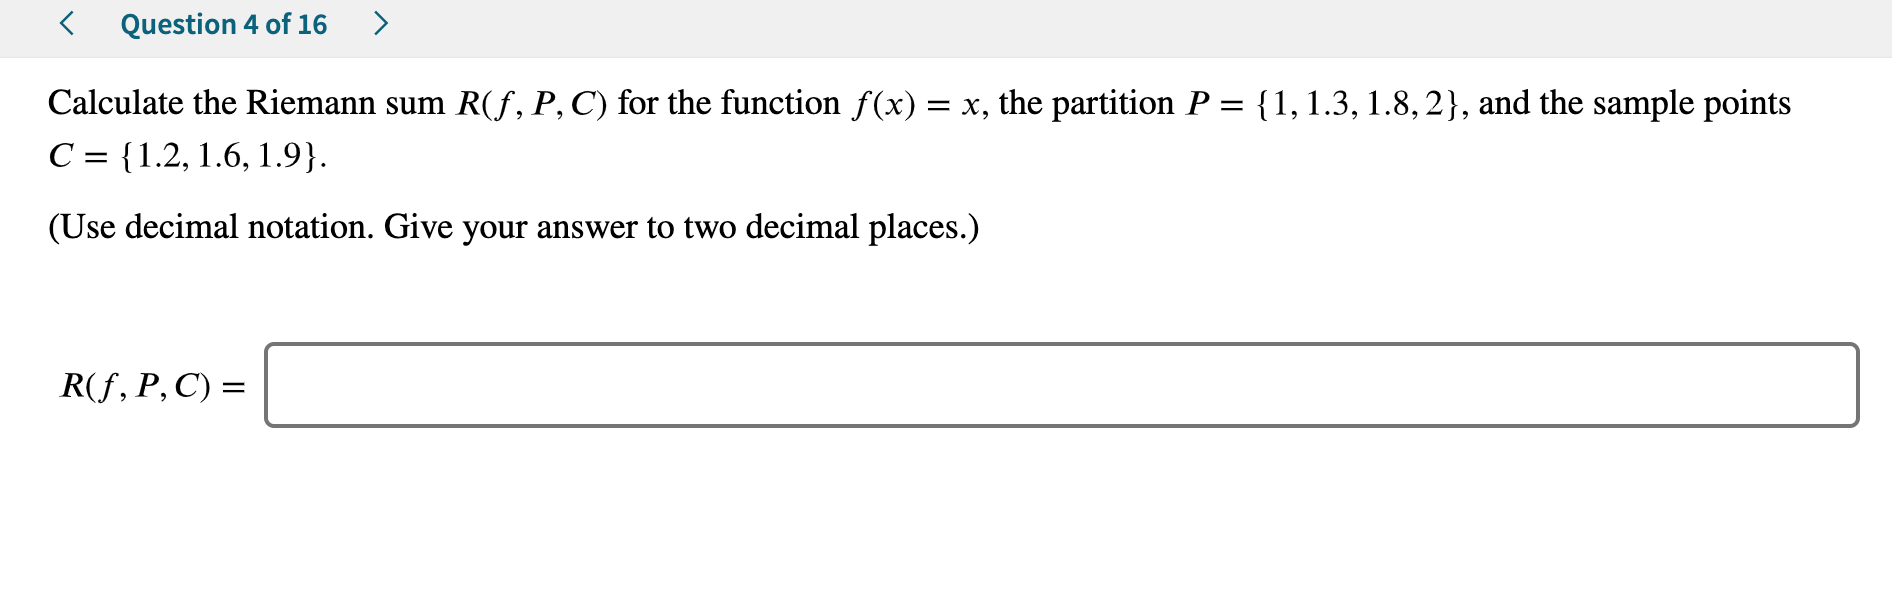 Question 4 of 16
Calculate the Riemann sum R(f, P, C) for the function f(x) x, the partition P = {1,1.3, 1.8,2}, and the sample points
C 1.2, 1.6, 1.9}
(Use decimal notation. Give your answer to two decimal places.)
R(f, P, C)
